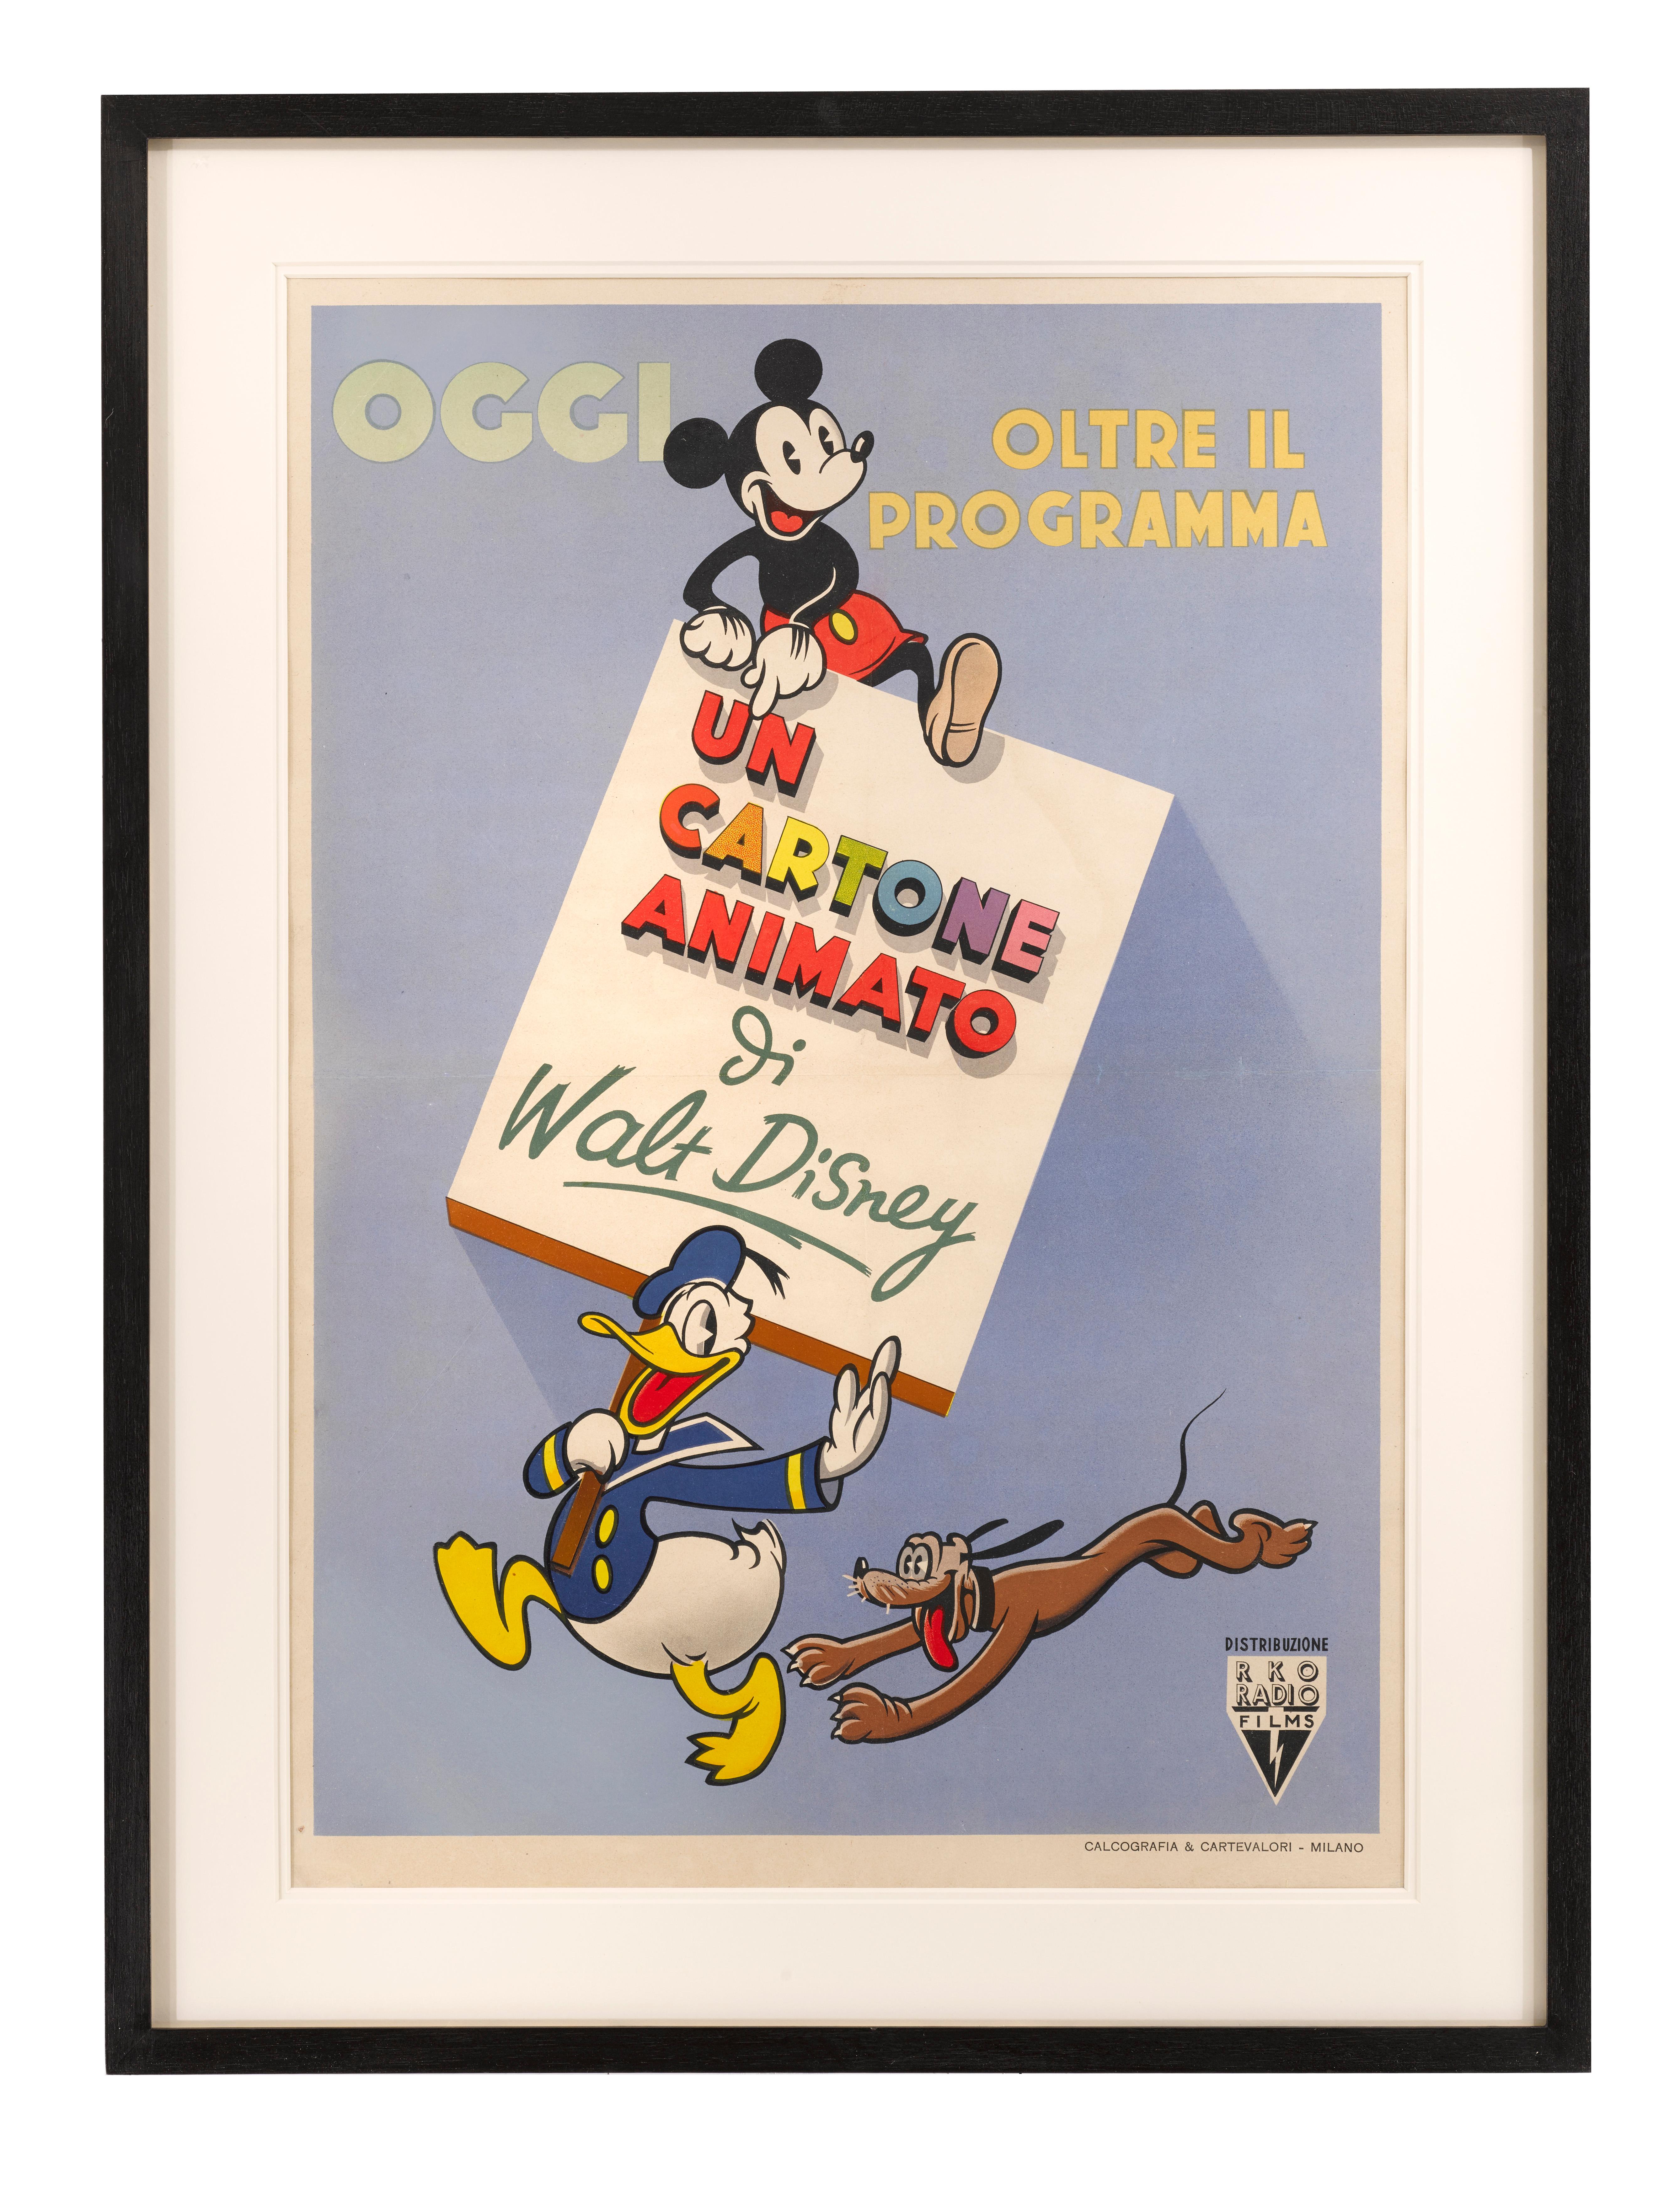 Original Italian film poster for Walt Disney Animations / Un Cartone Animato. This rare animation poster was designed to advertise Walt Disney shorts. In Italy posters were not produced for every short cartoon, and this stock poster would allow the